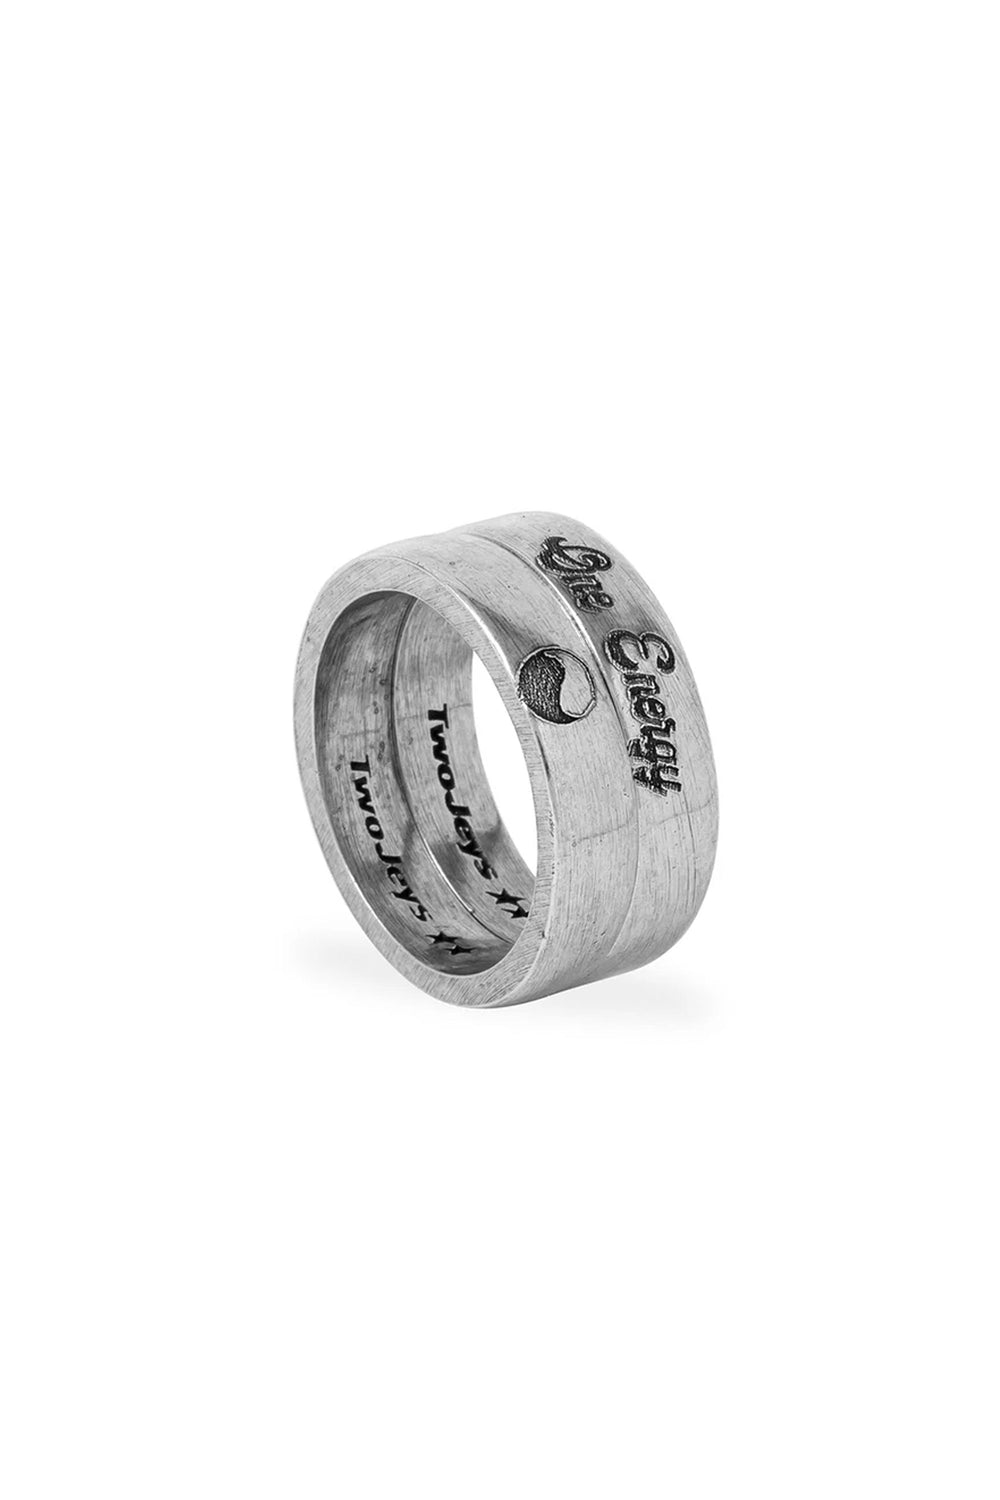 PUKAS-SURF-SHOP-RING-SET-TWO-JEYS-ONE-ENERGY